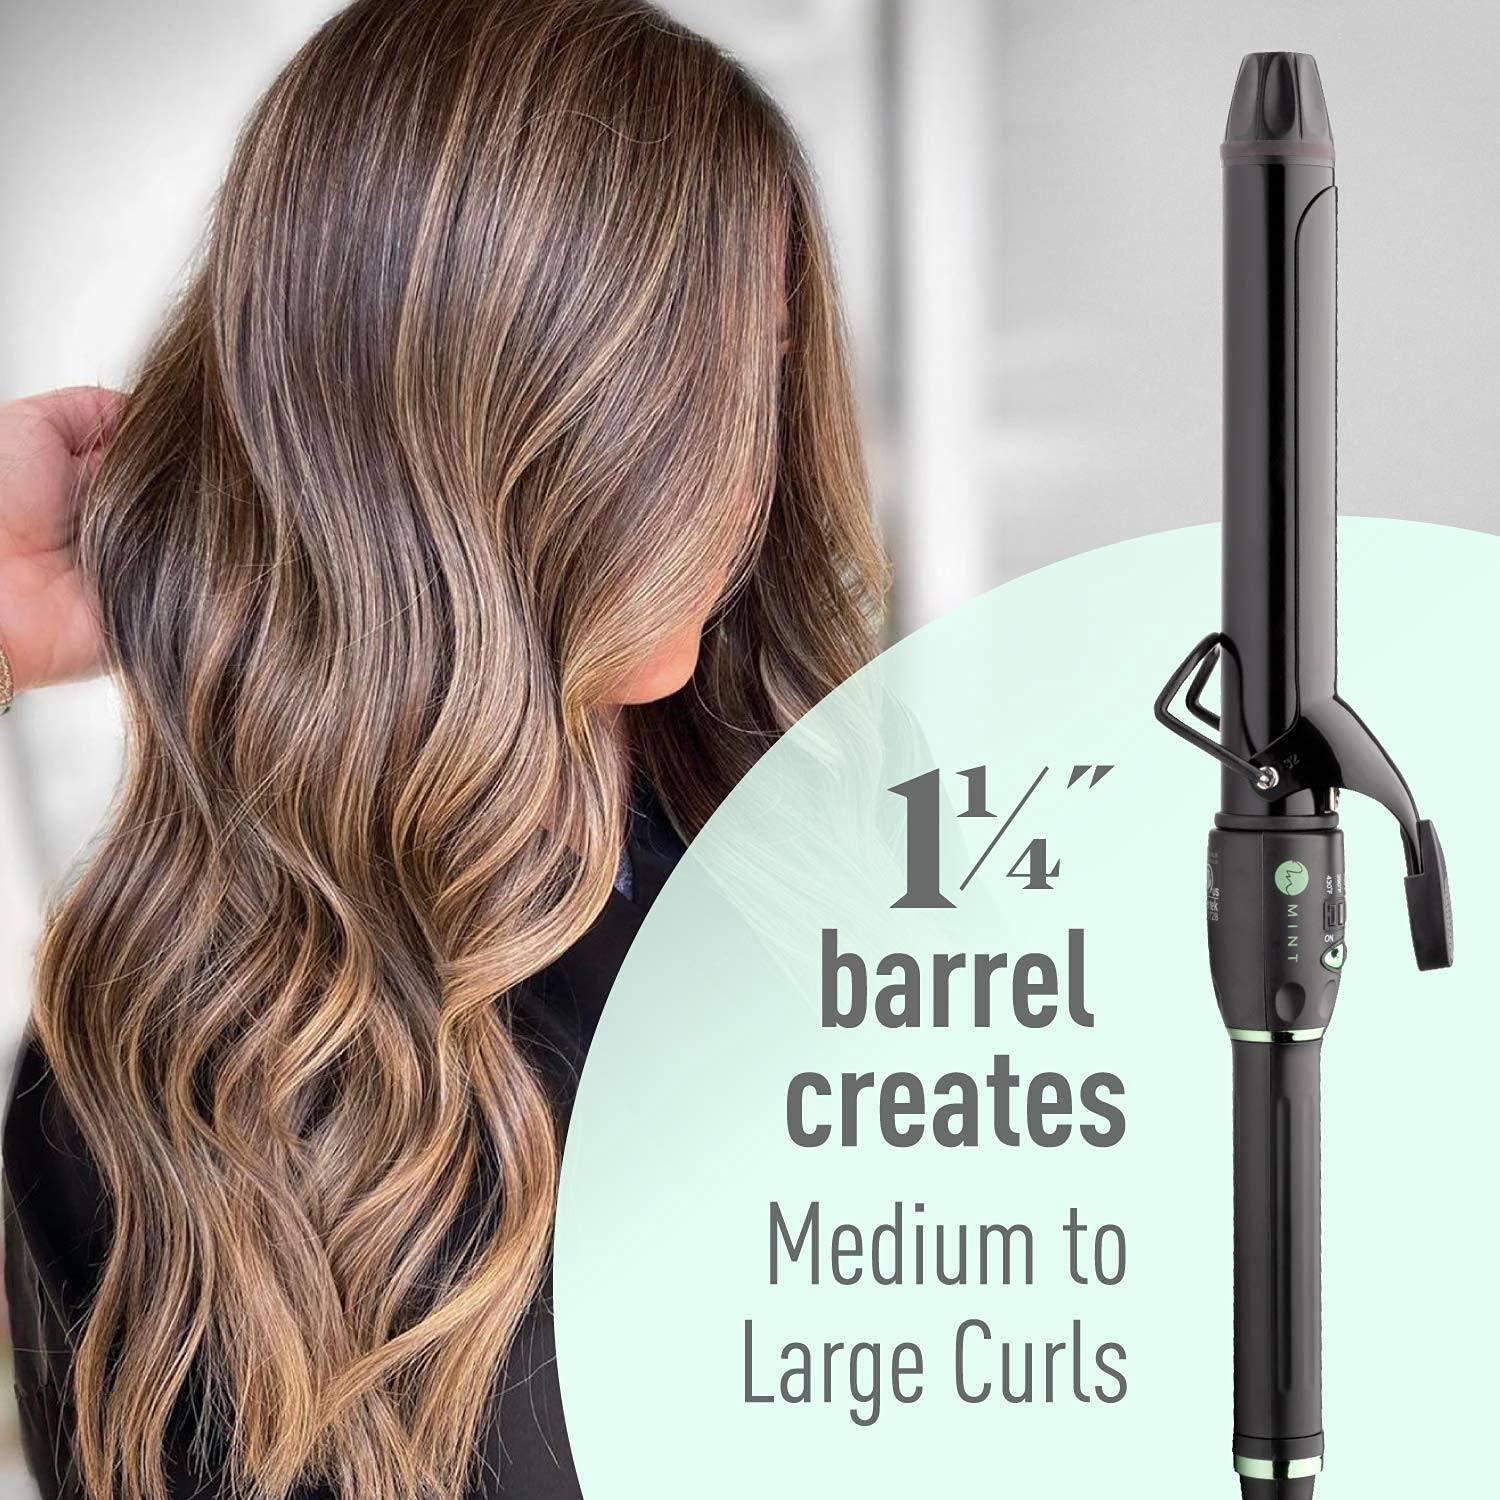 Professional Series Curling Iron 1 1/4 inch by MINT | Extra-Long 2-Heater  Ceramic Barrel That Stays Hot. Hair Curler / Curl Maker for Medium to Large  Curls. Travel-Ready Dual Voltage.  Inch (Pack of 1)